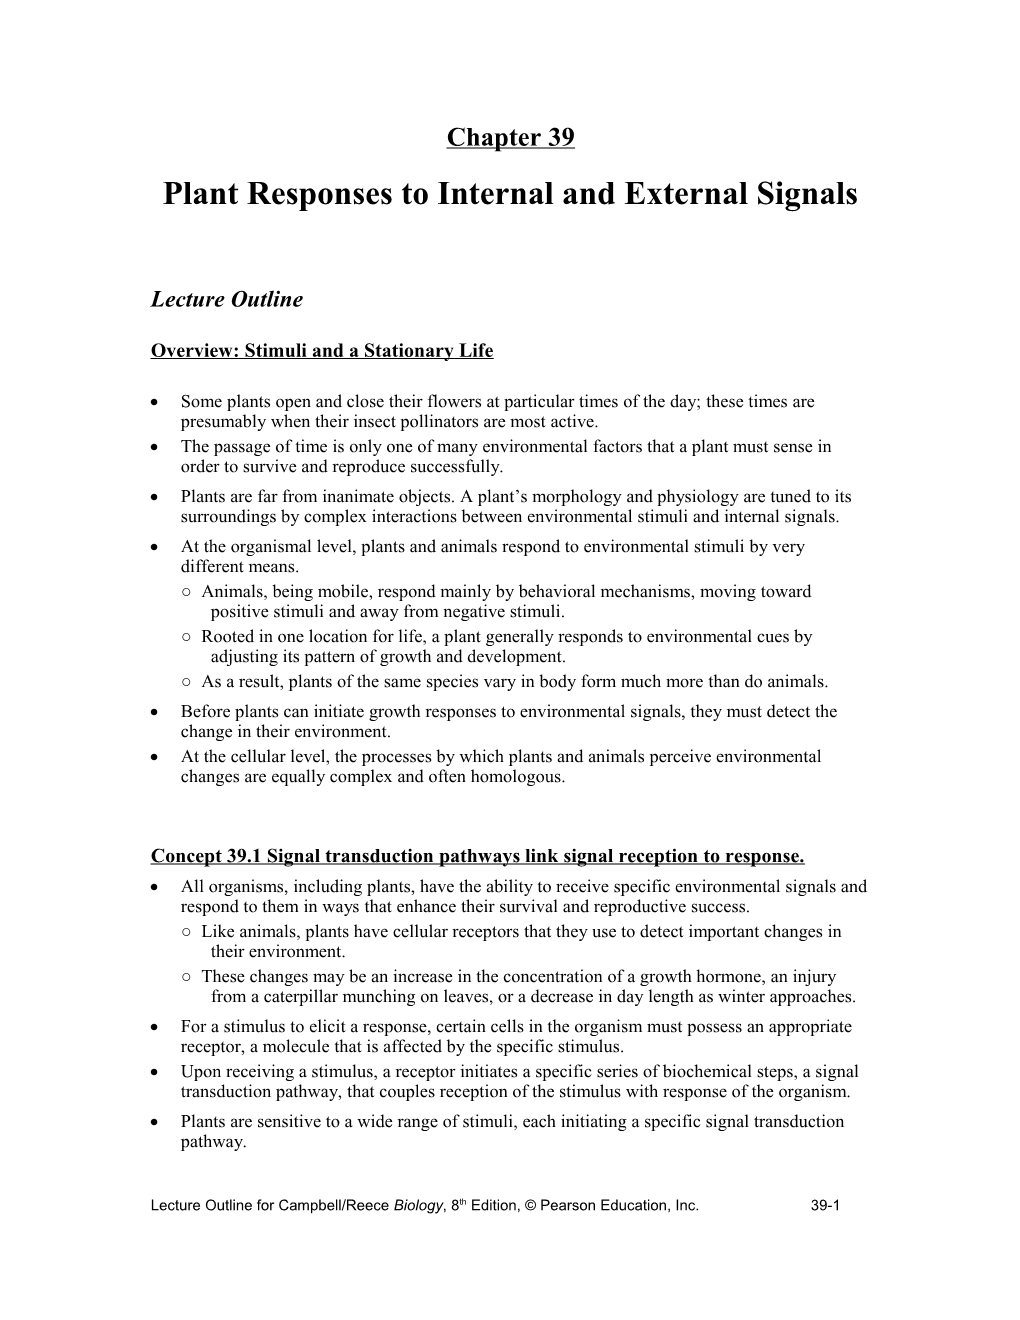 Plant Responses to Internal and External Signals s2